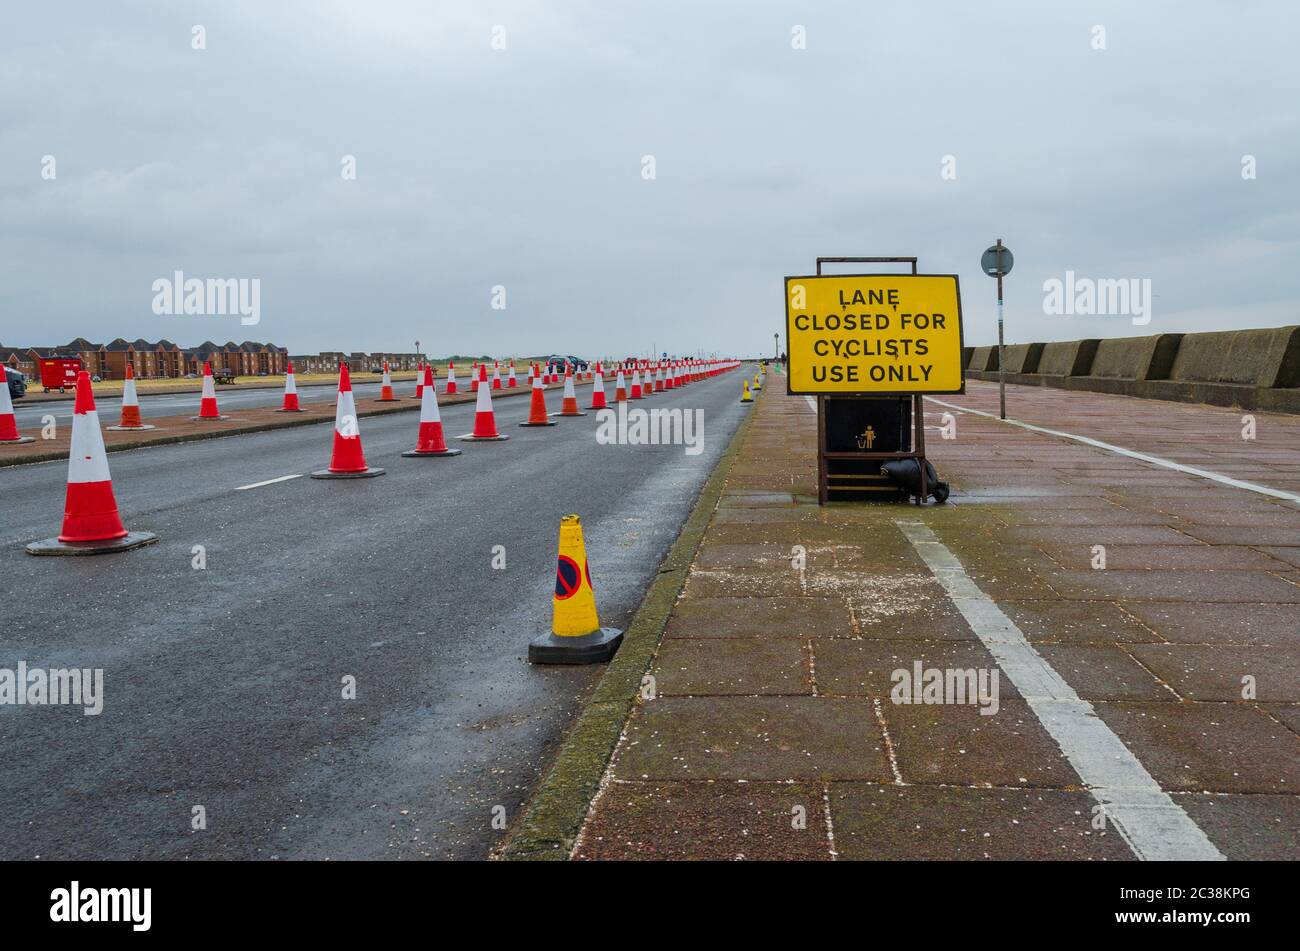 New Brighton, UK: Jun 11, 2020: One lane of the dual carriageway of New Brighton promenade has been closed using traffic cones. This is to allow socia Stock Photo